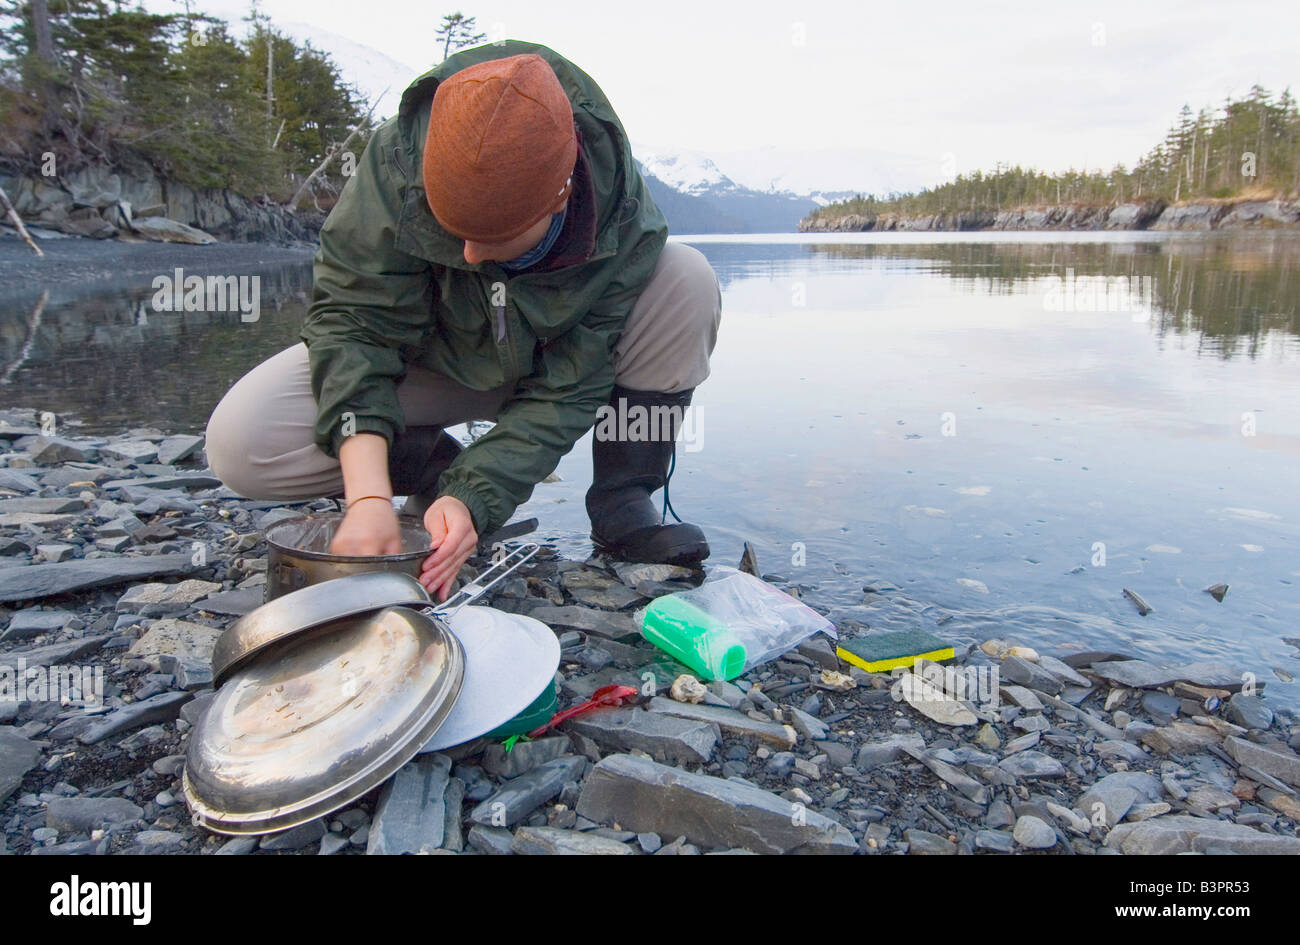 Washing dishes outdoors, riverside, evening, Pacific Coast, Prince William Sound, Chugach National Forest, Alaska, USA Stock Photo